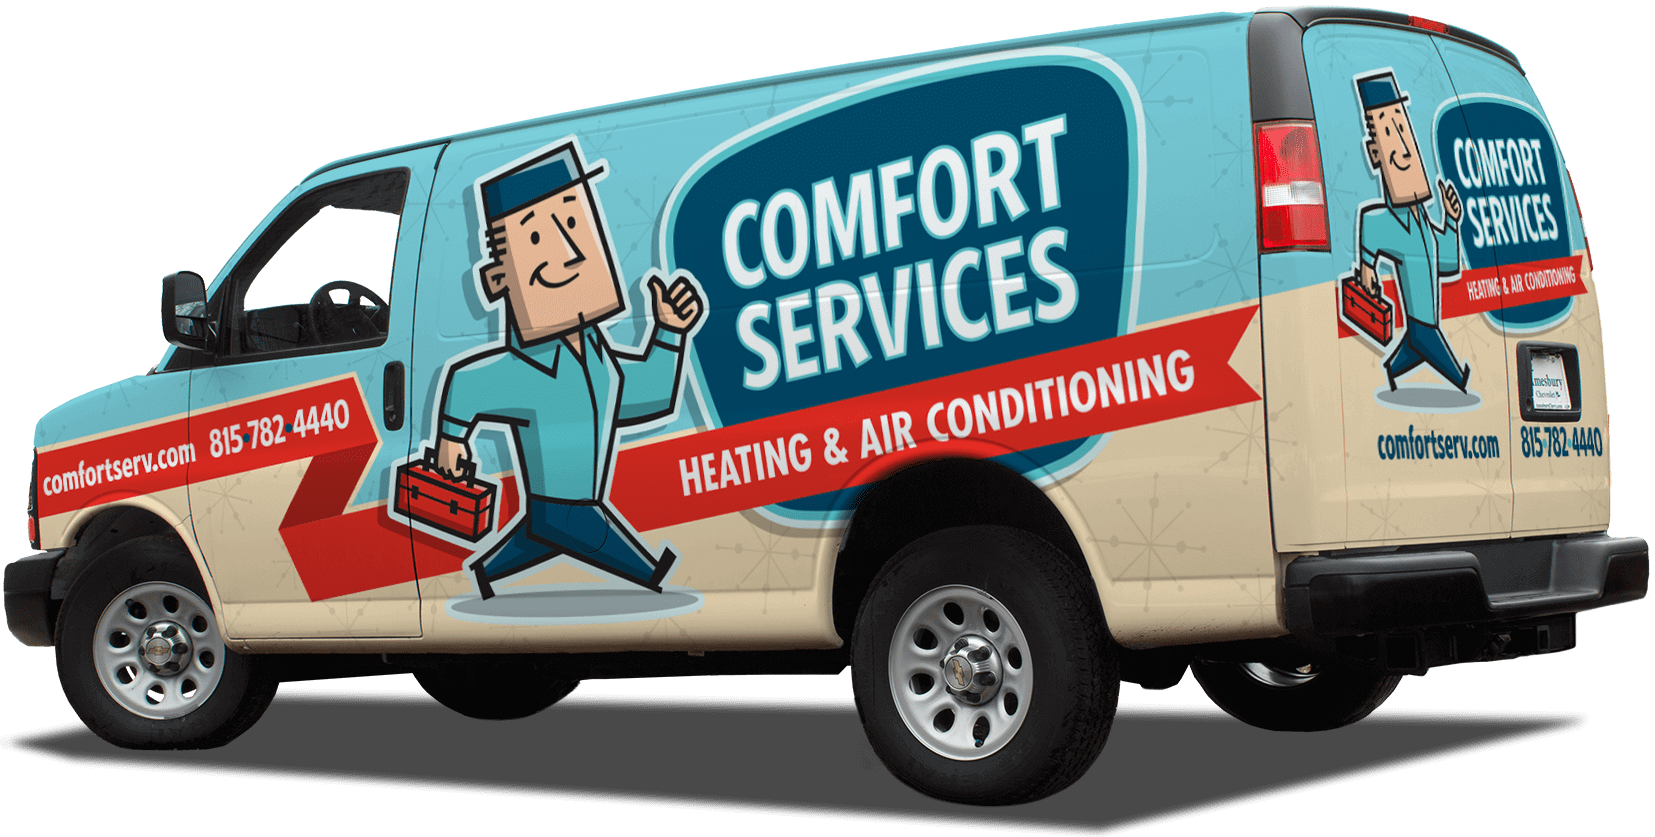 See what makes Comfort Services Heating & Air Conditioning your number one choice for Ductless AC repair in Naperville IL.